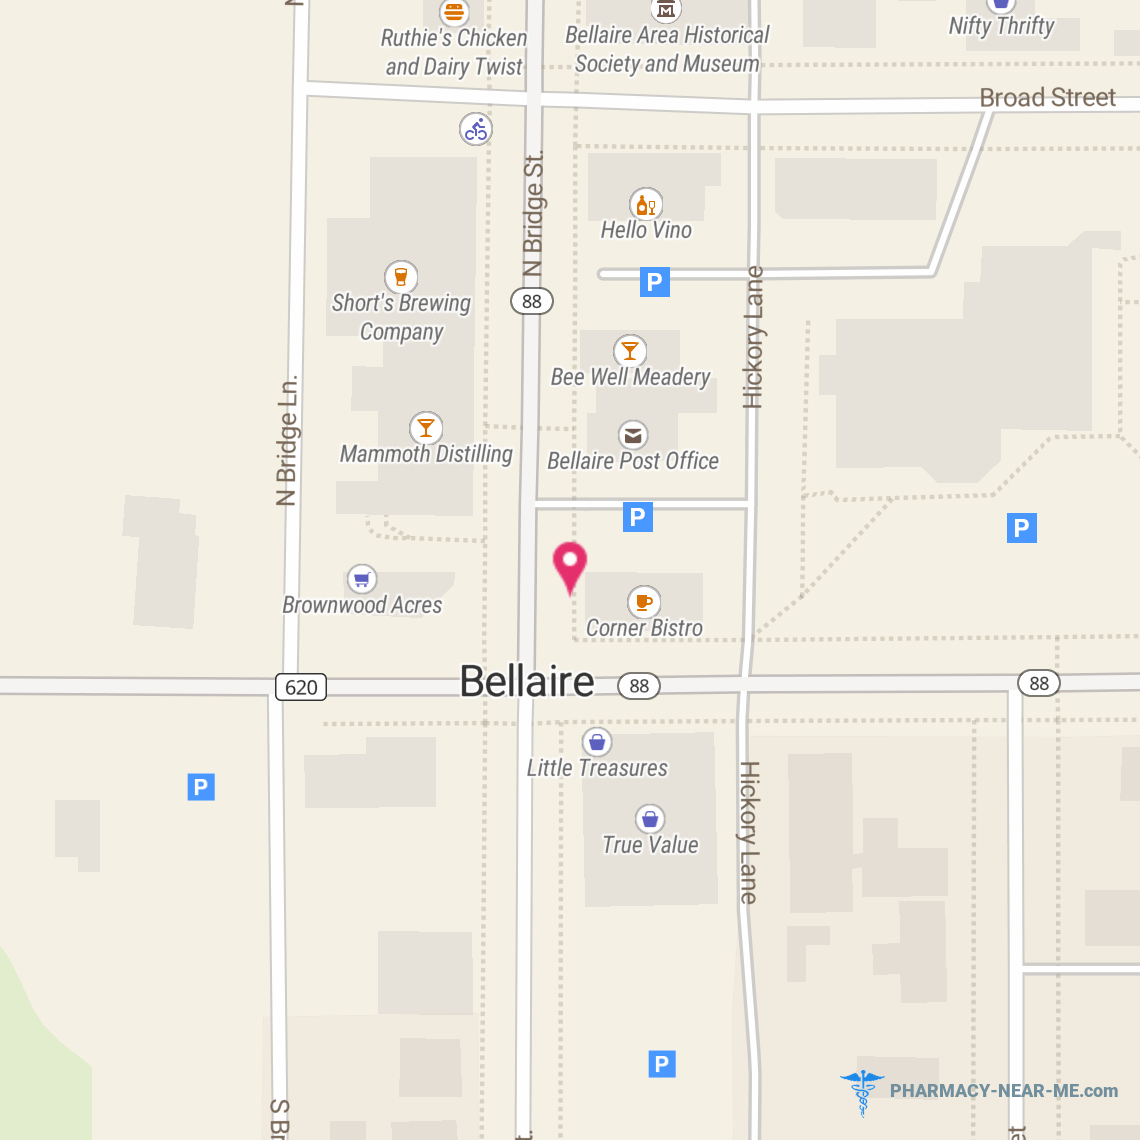 BELLAIRE PHARMACY INC - Pharmacy Hours, Phone, Reviews & Information: 120 North Bridge Street, Bellaire, Michigan 49615, United States